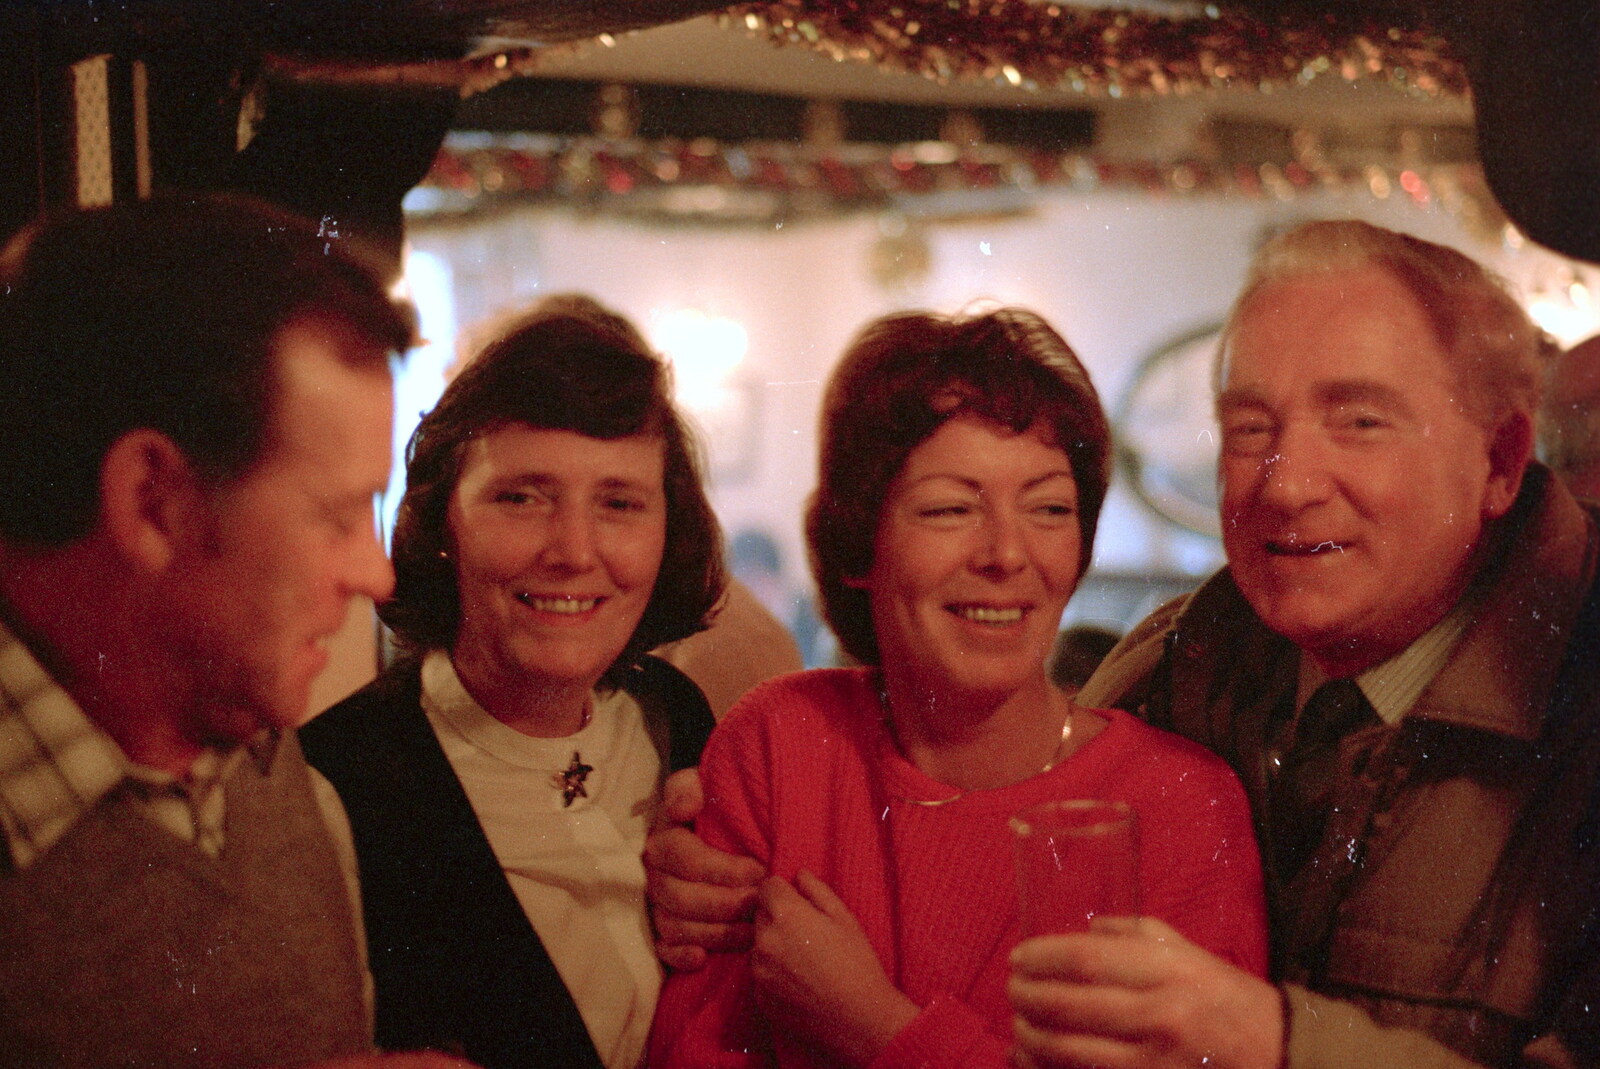 Jack and Maureen from Christmas in Macclesfield and Wetherby, Cheshire  and Yorkshire - 25th December 1985